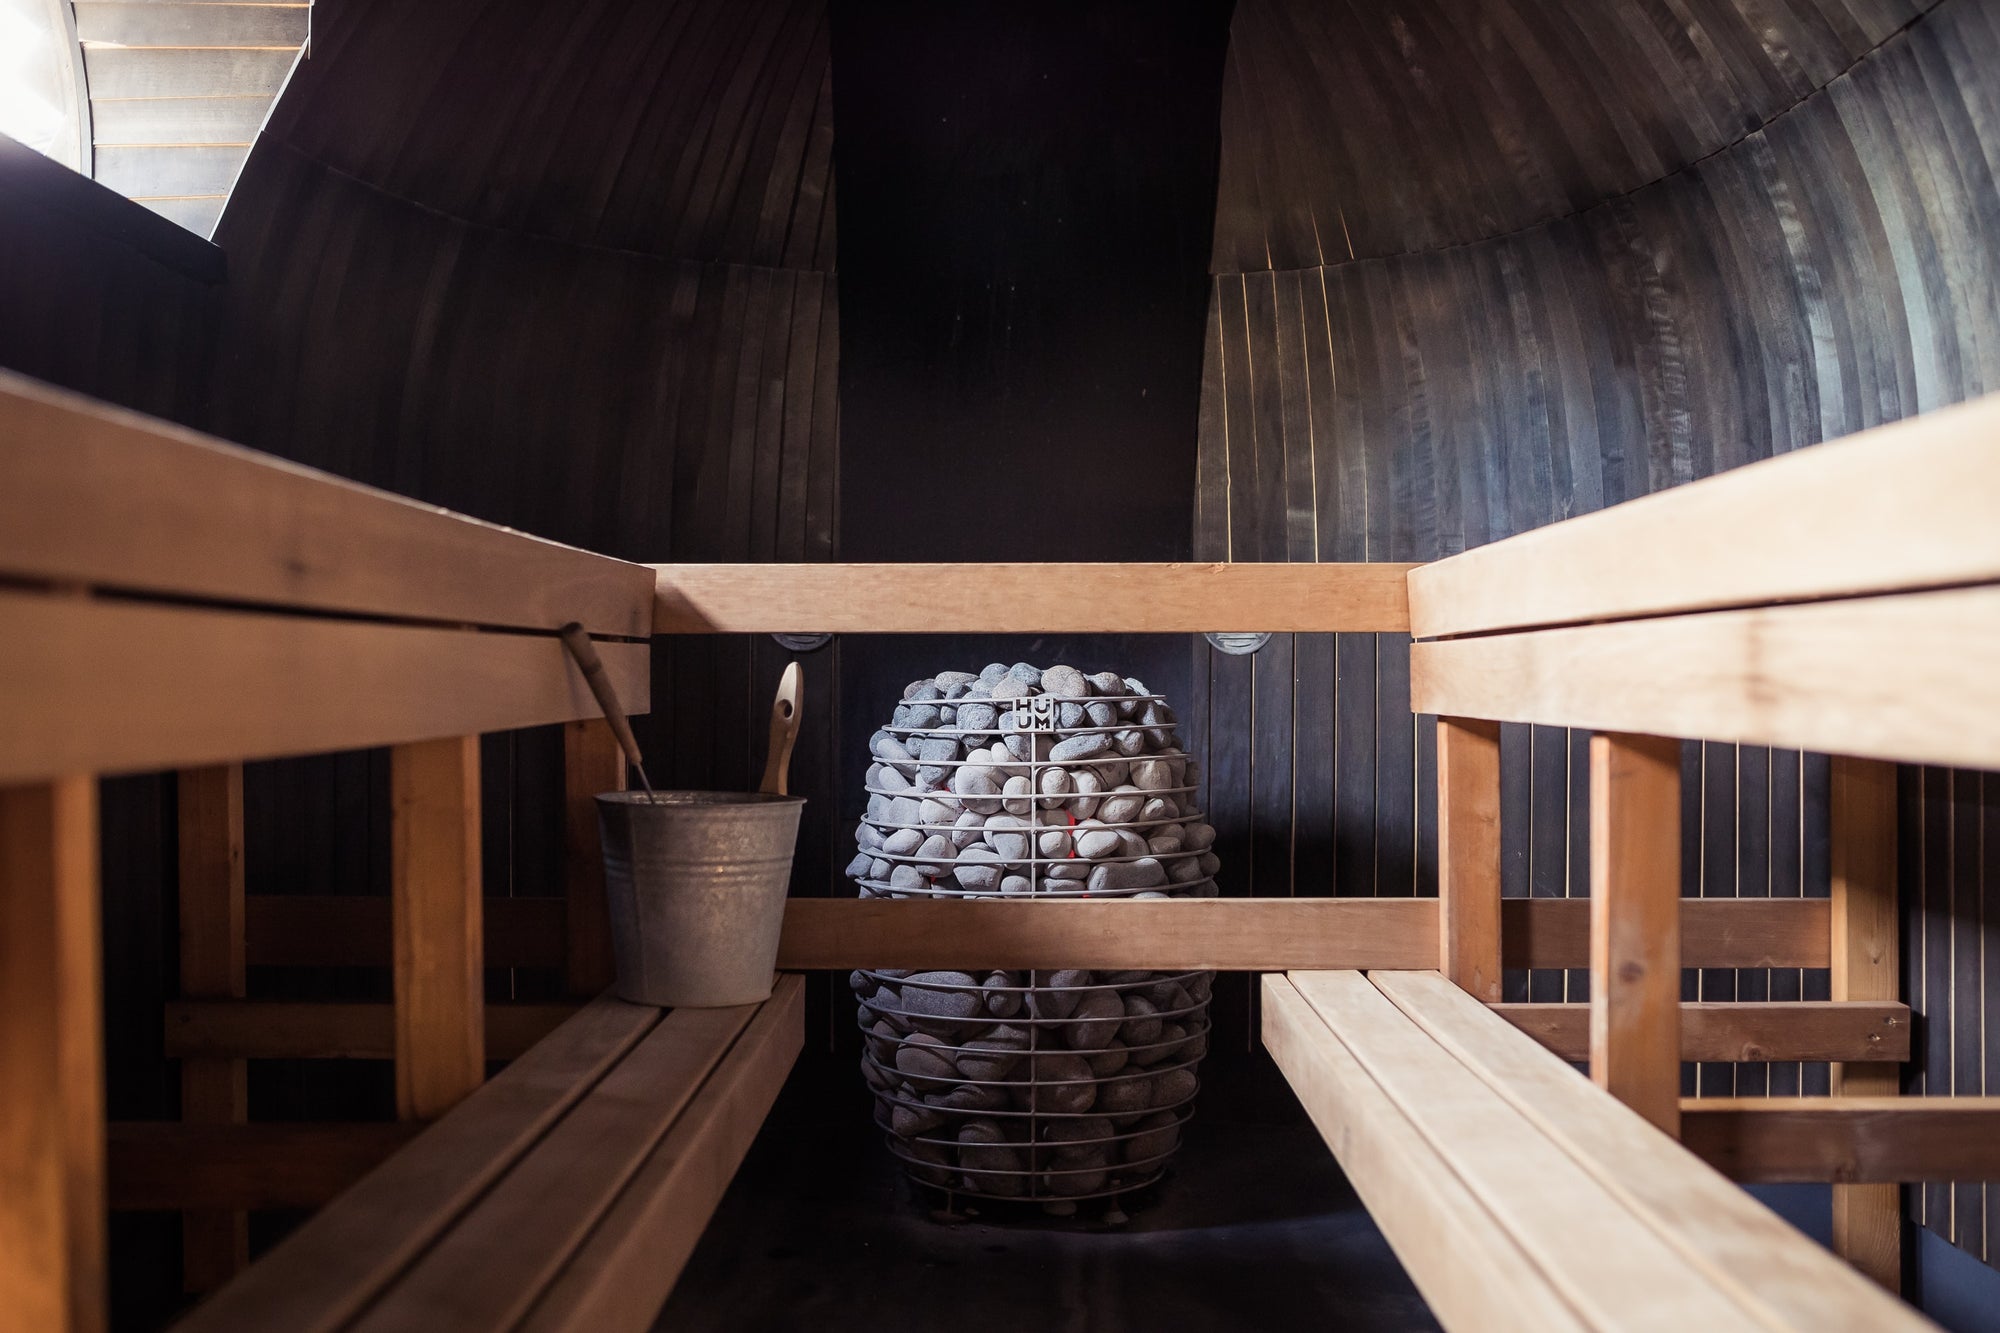 Is The Sauna Good For You?